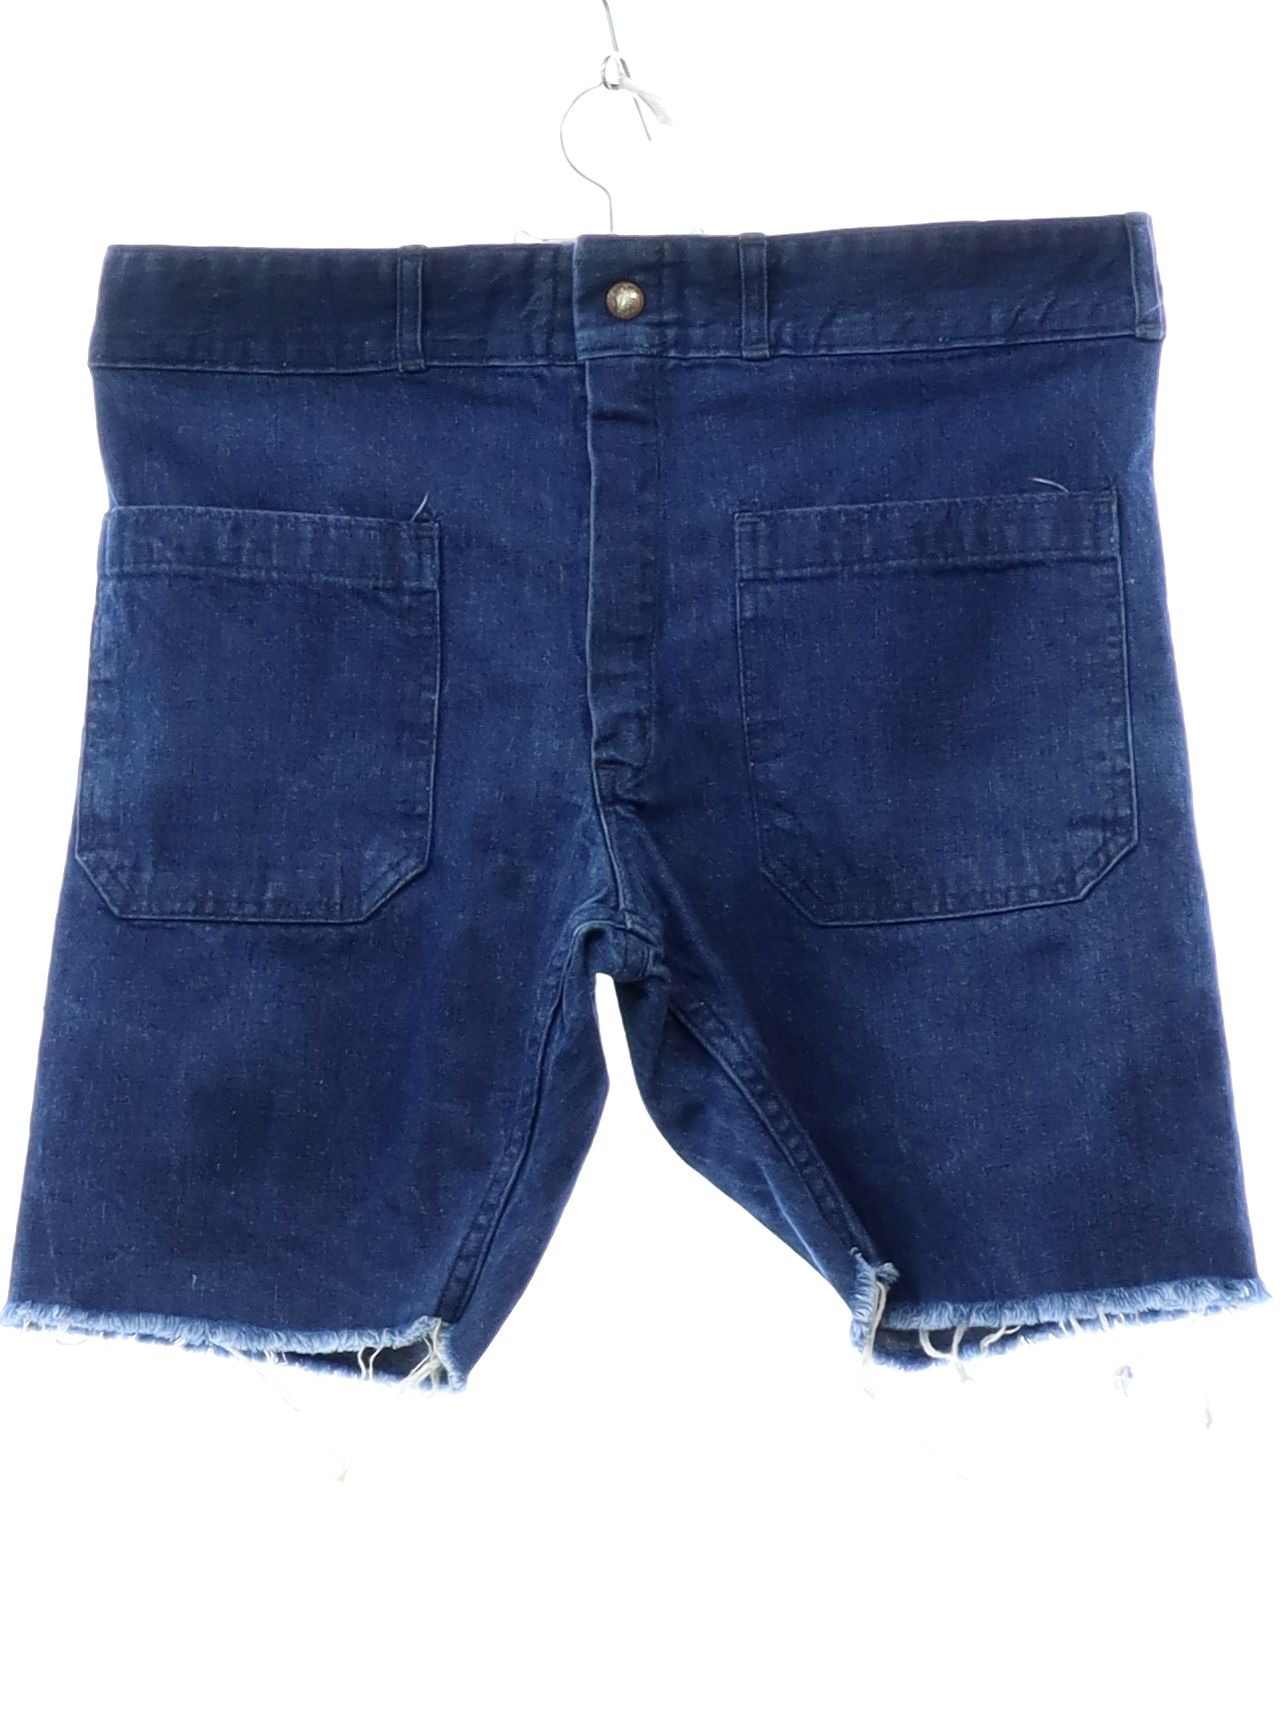 After 150 Years, Here's Why Americans Are Still Pulling Their Jeans On